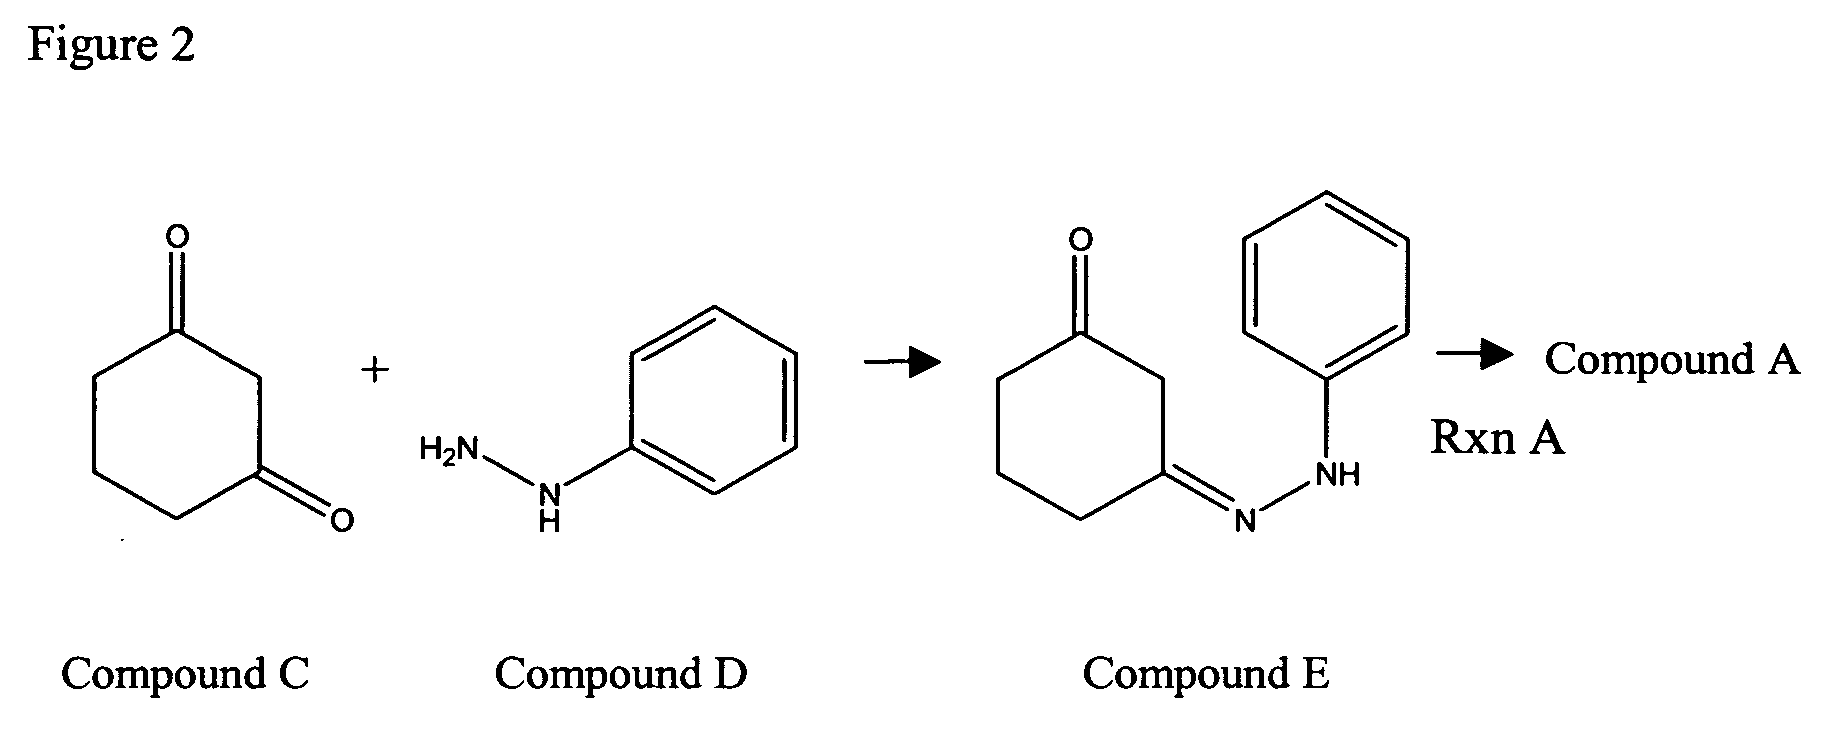 Compounds and methods for carbazole synthesis